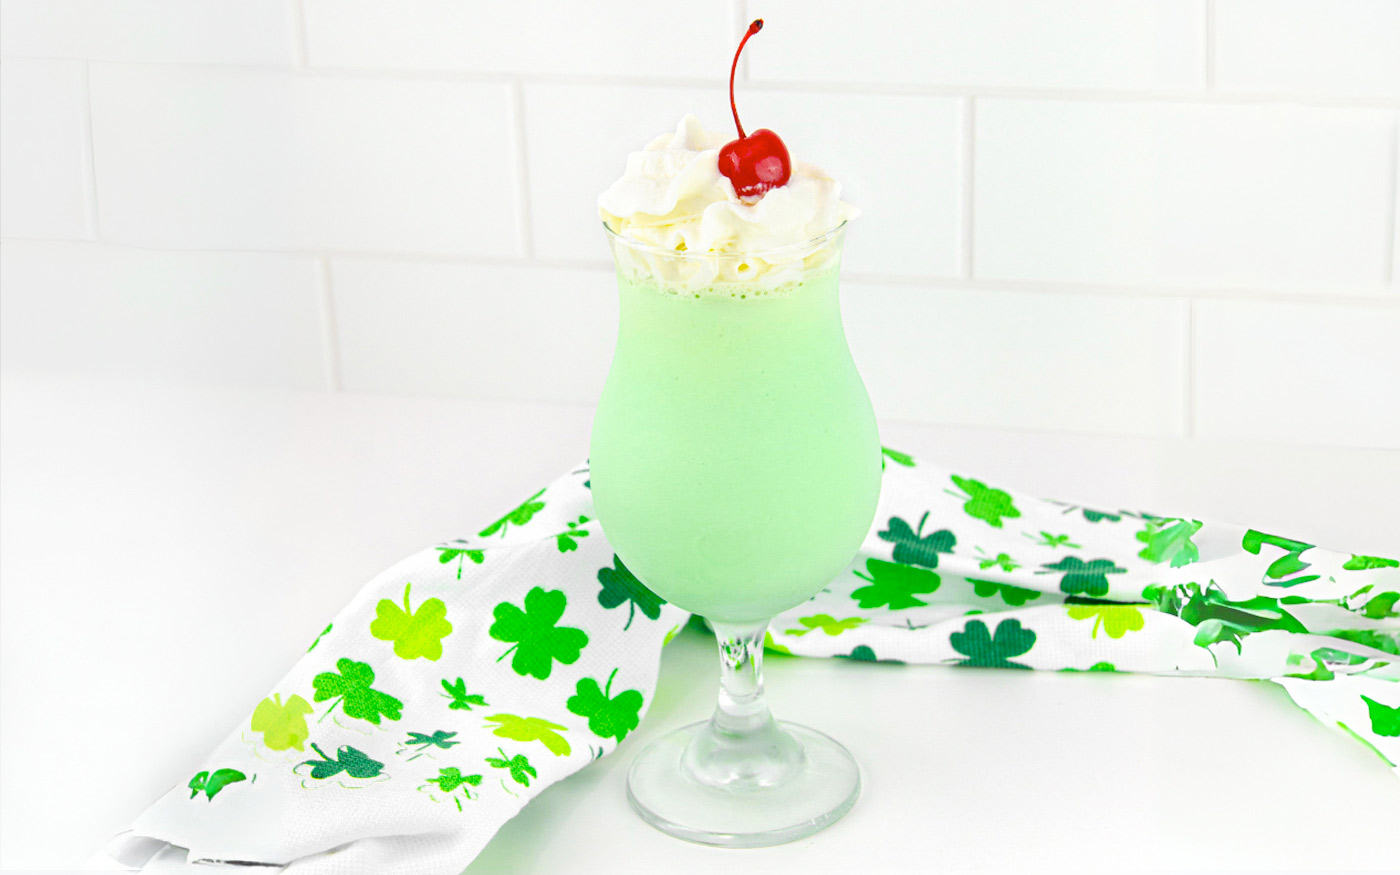 Boozy Shamrock Shake which is a green shake with whipped cream and a maraschino cherry. St. Patrick's day style kitchen towel on counter top.